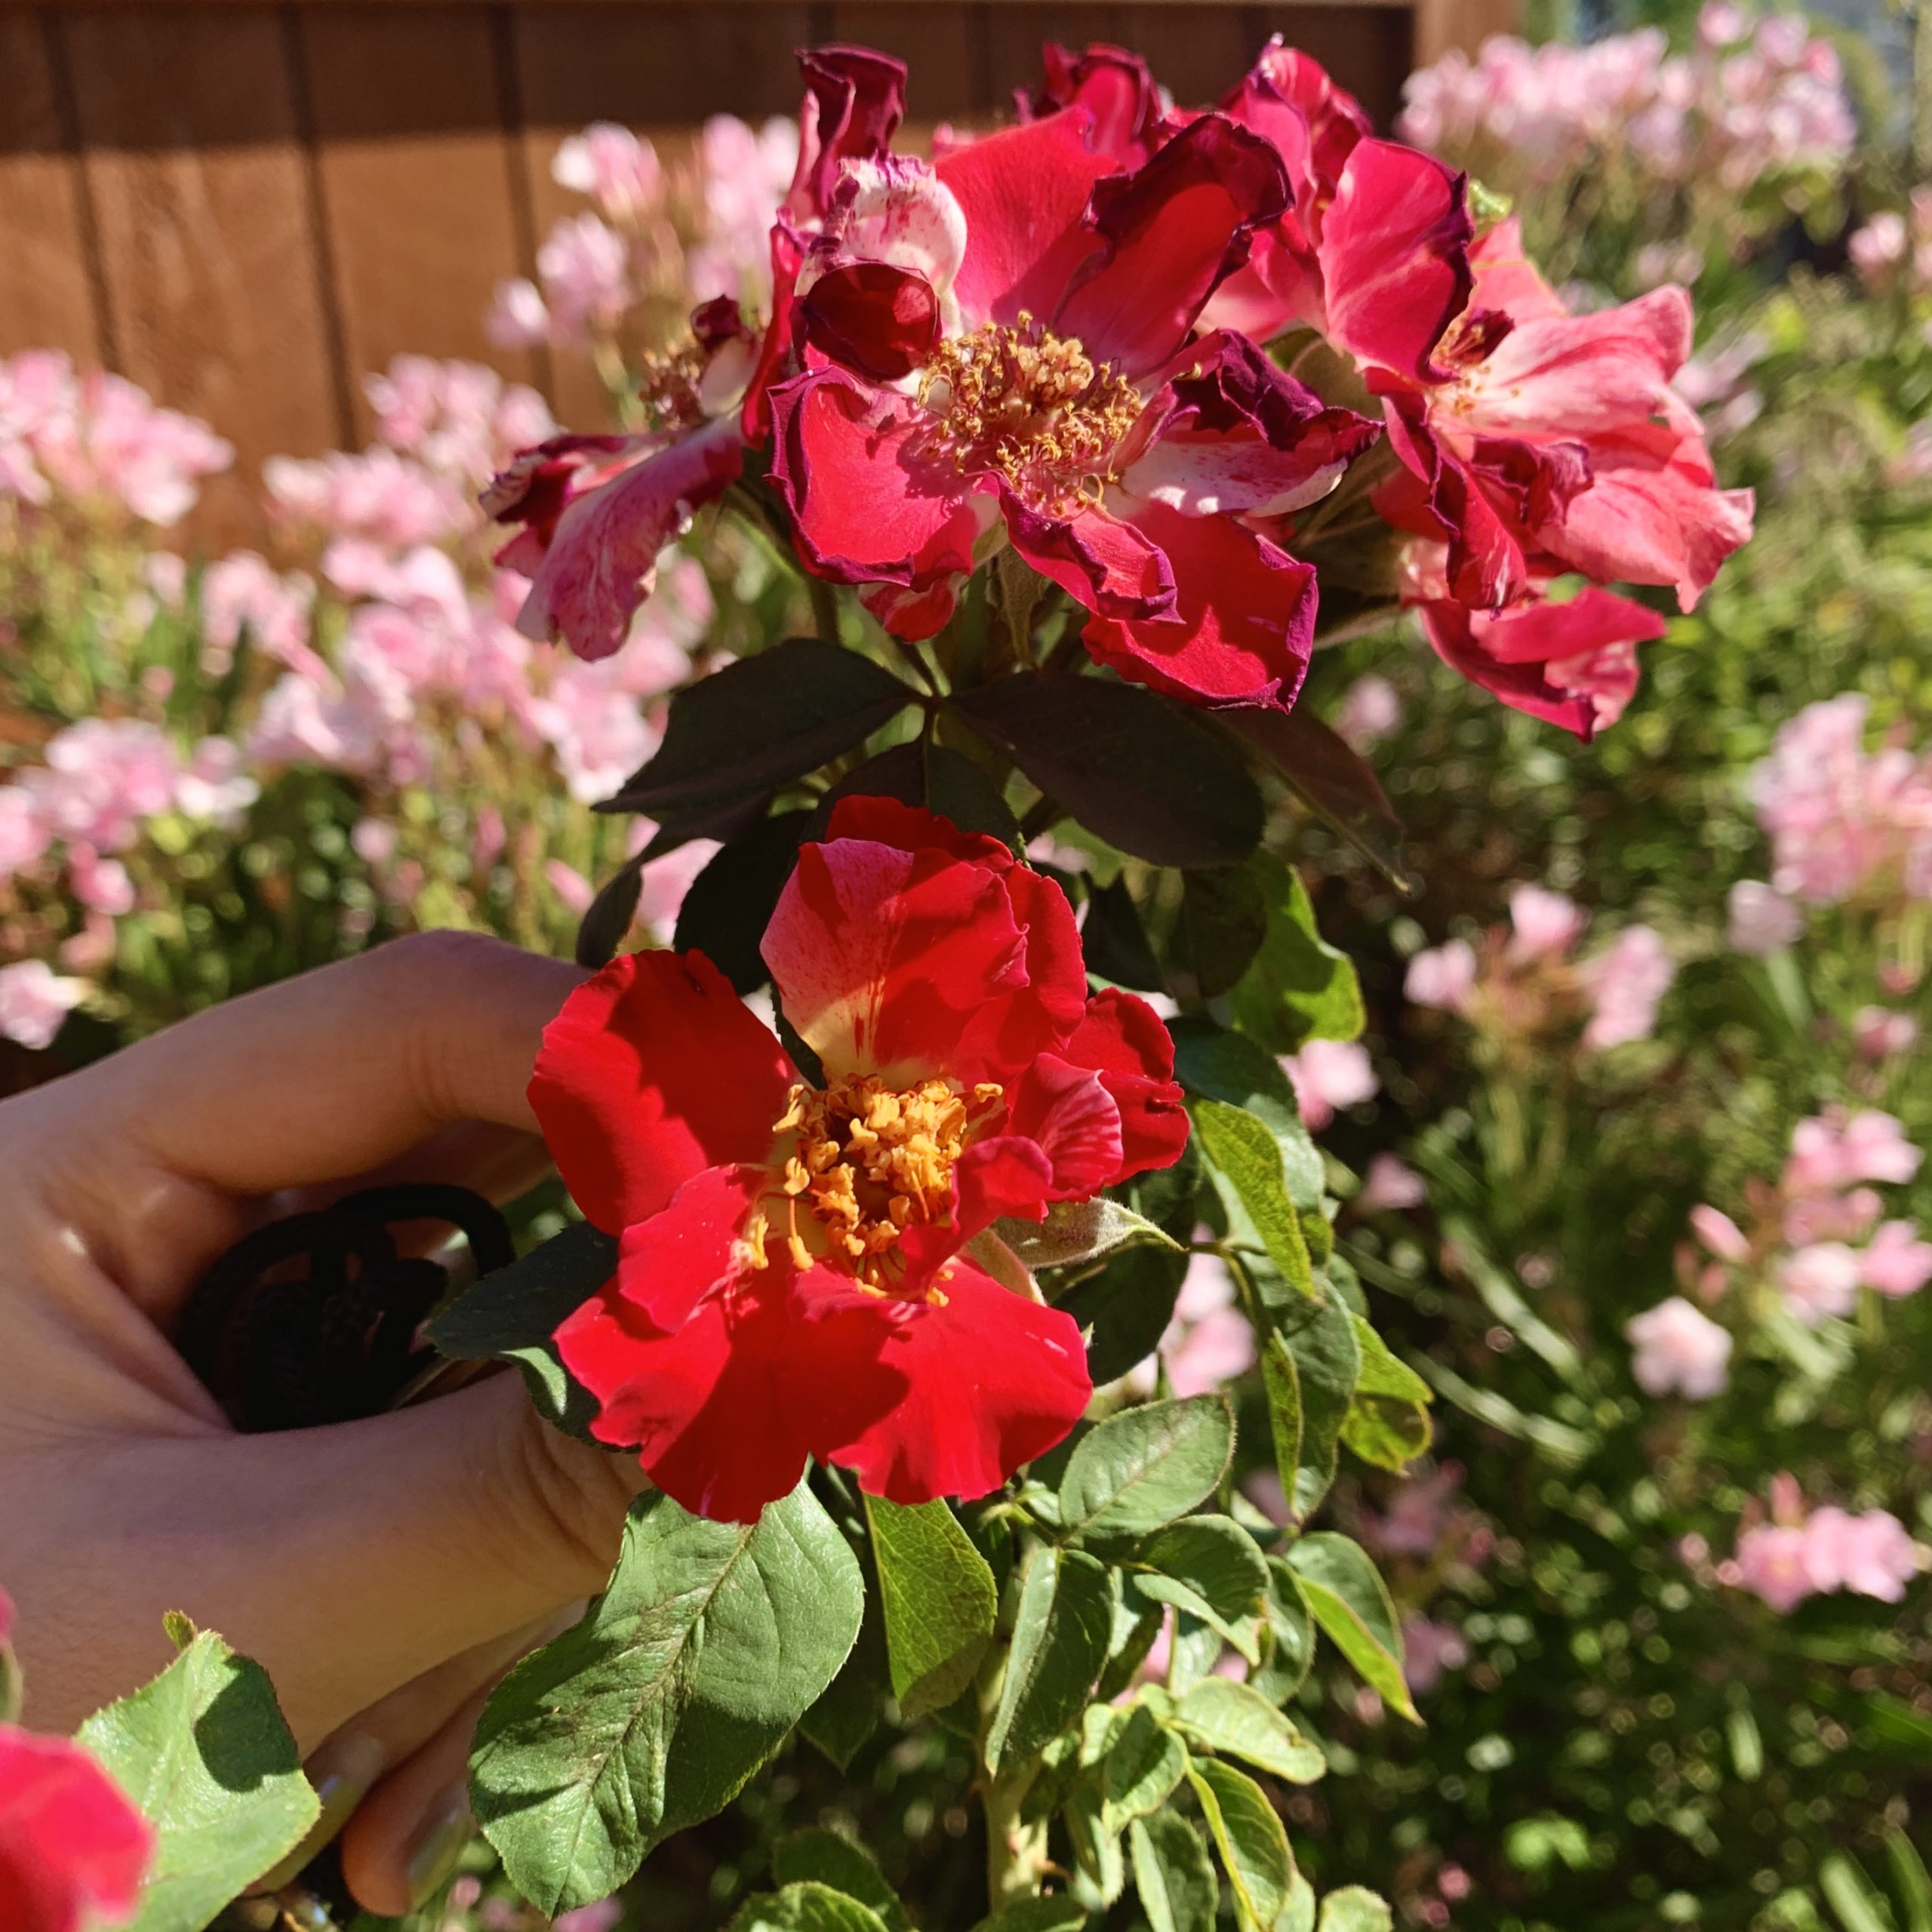 Red roses blooming